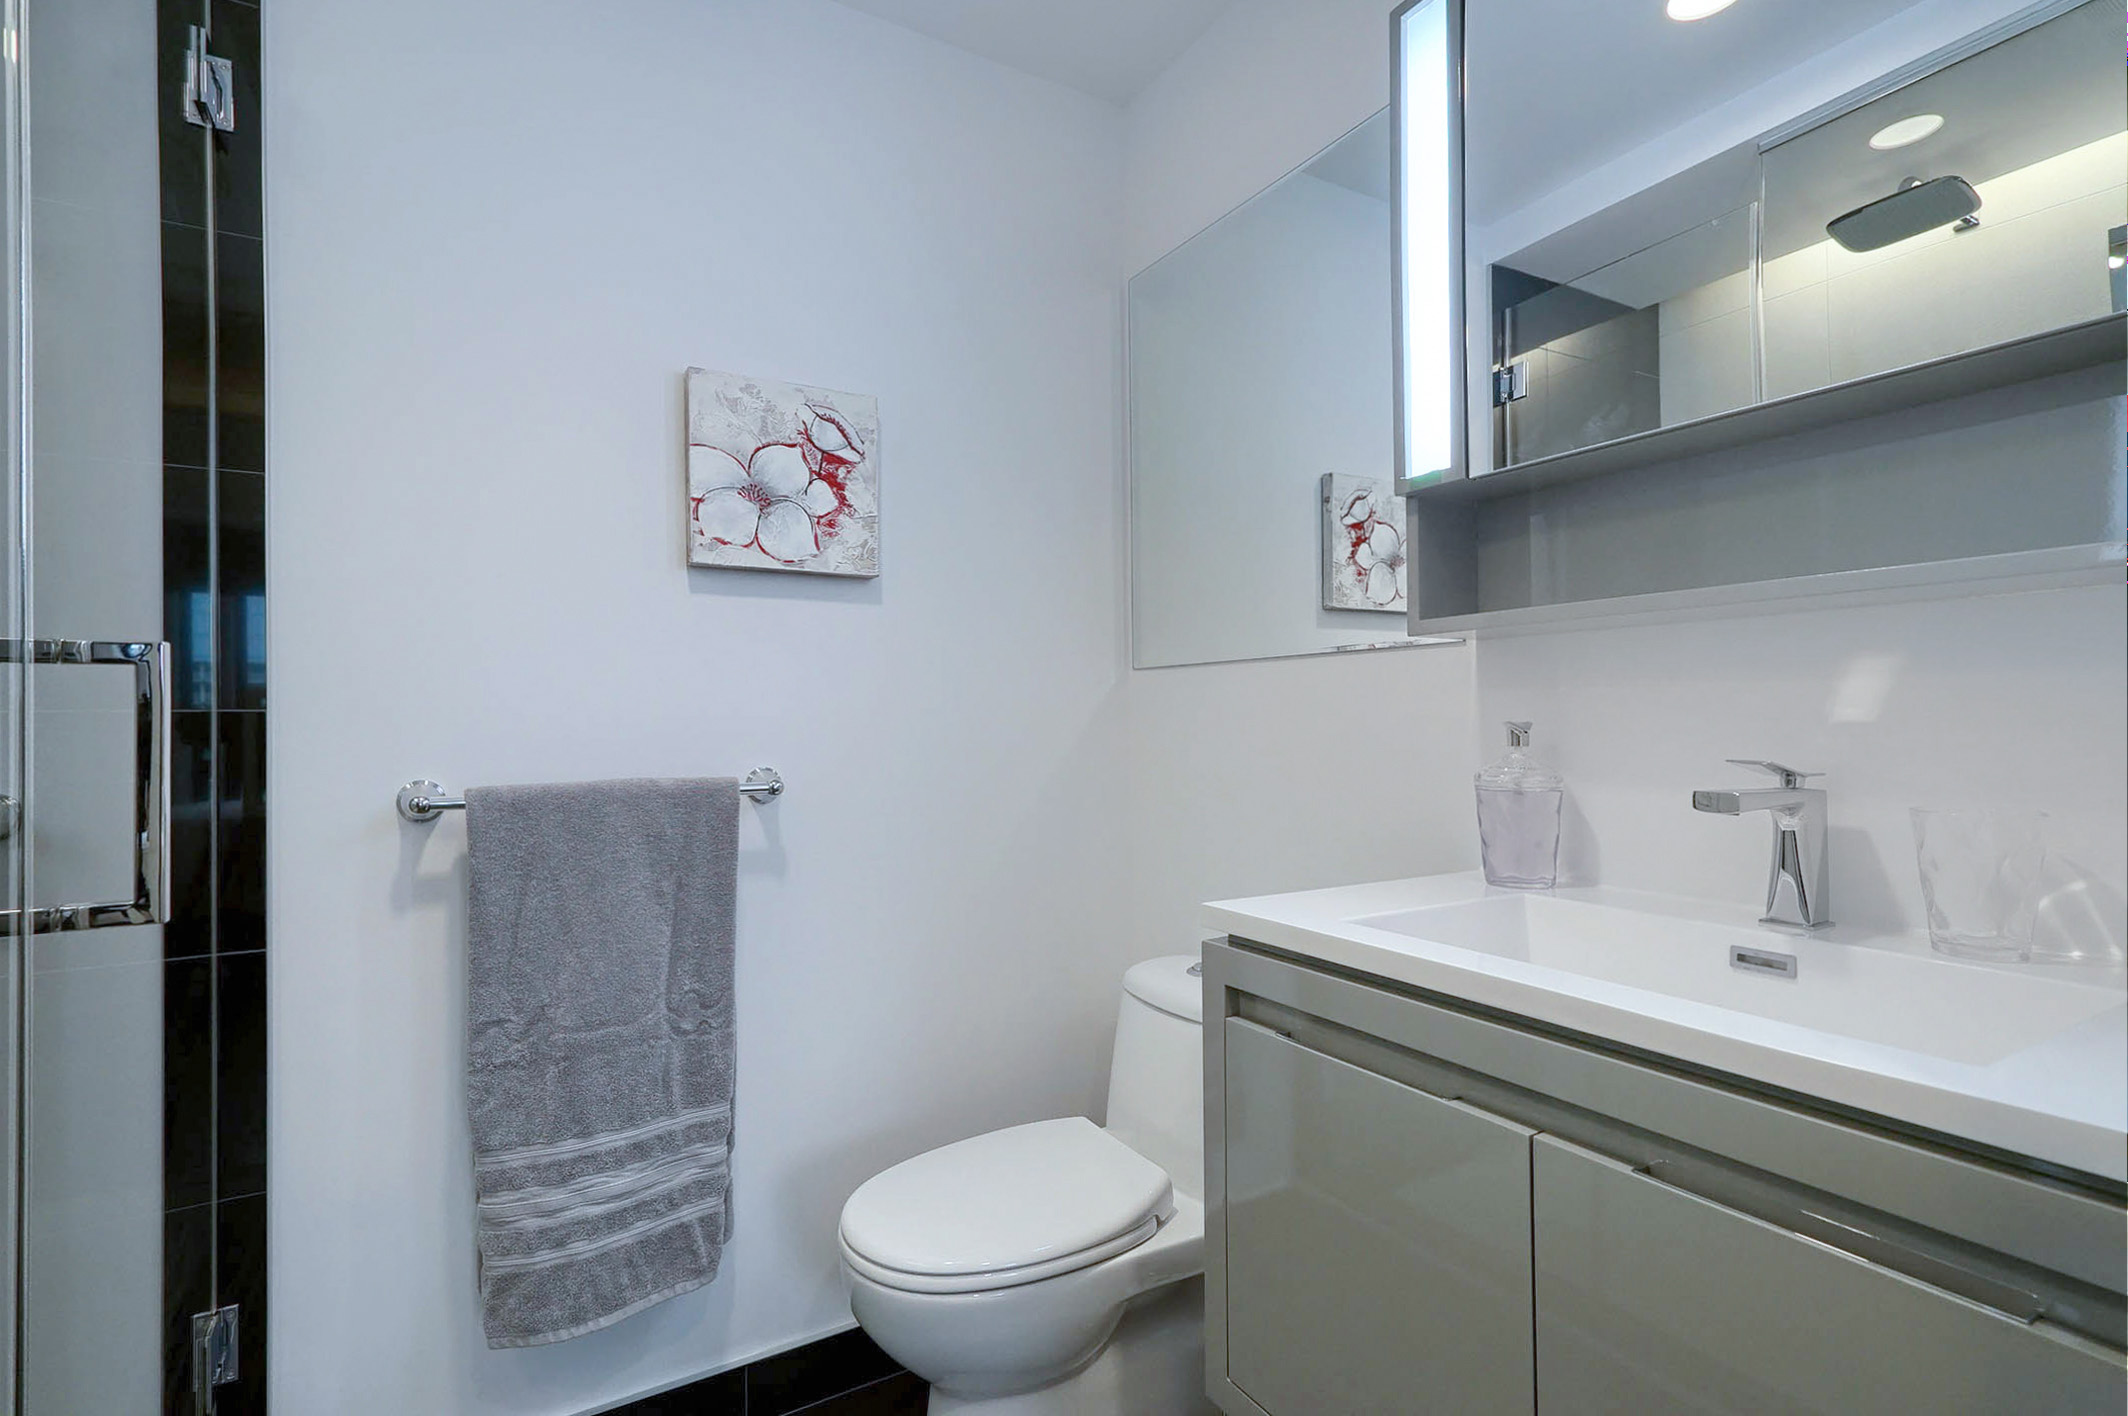 View of the bathroom showing the over-sized sink and toilet. Modern luxury in this furnished executive housing apartment in Montreal